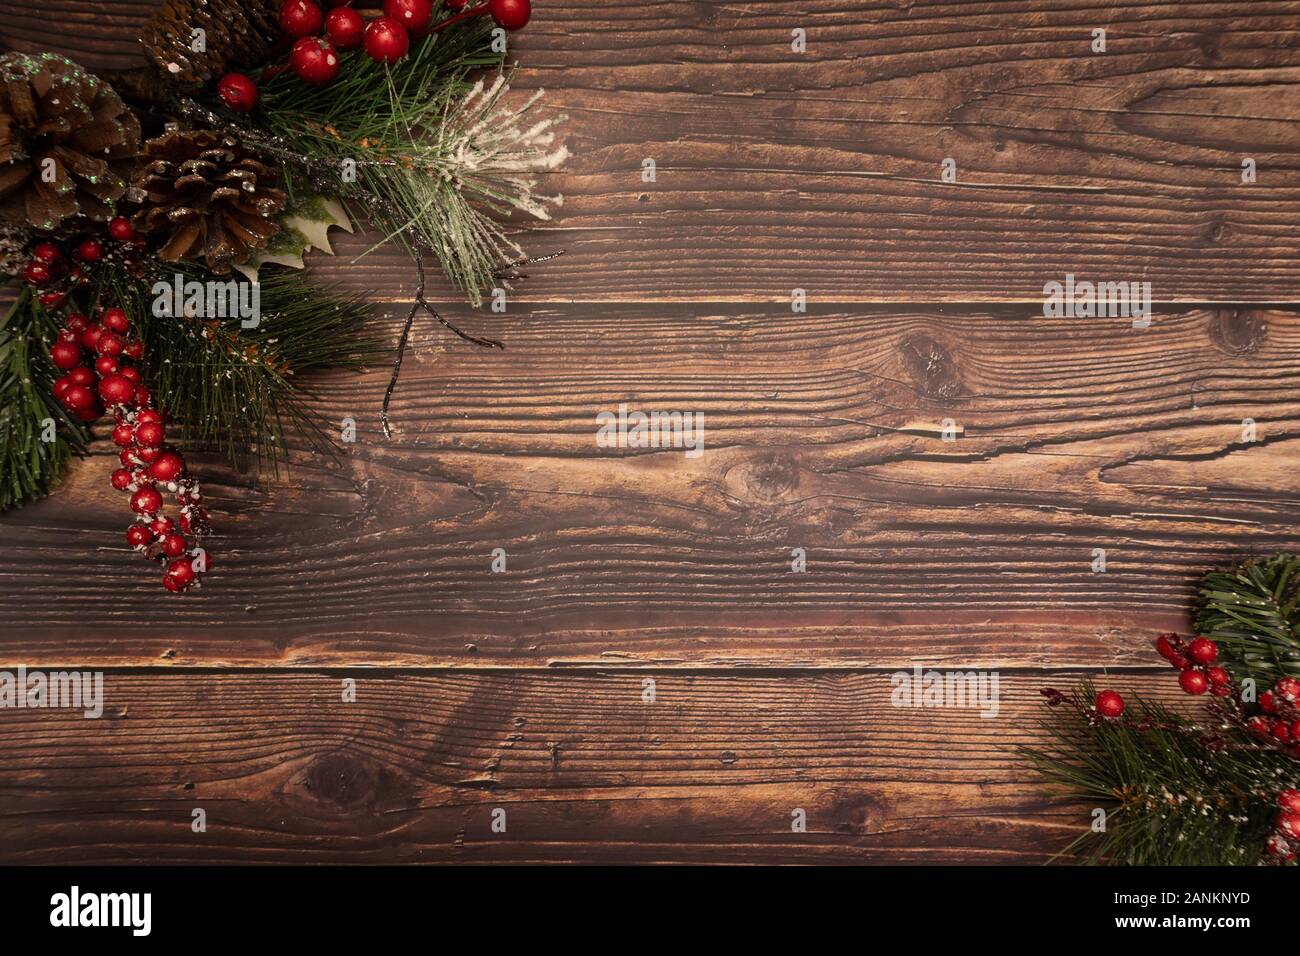 Christmas fir tree with berries pinecones and snow on wooden background. Flatlay, top view, copy space. Stock Photo